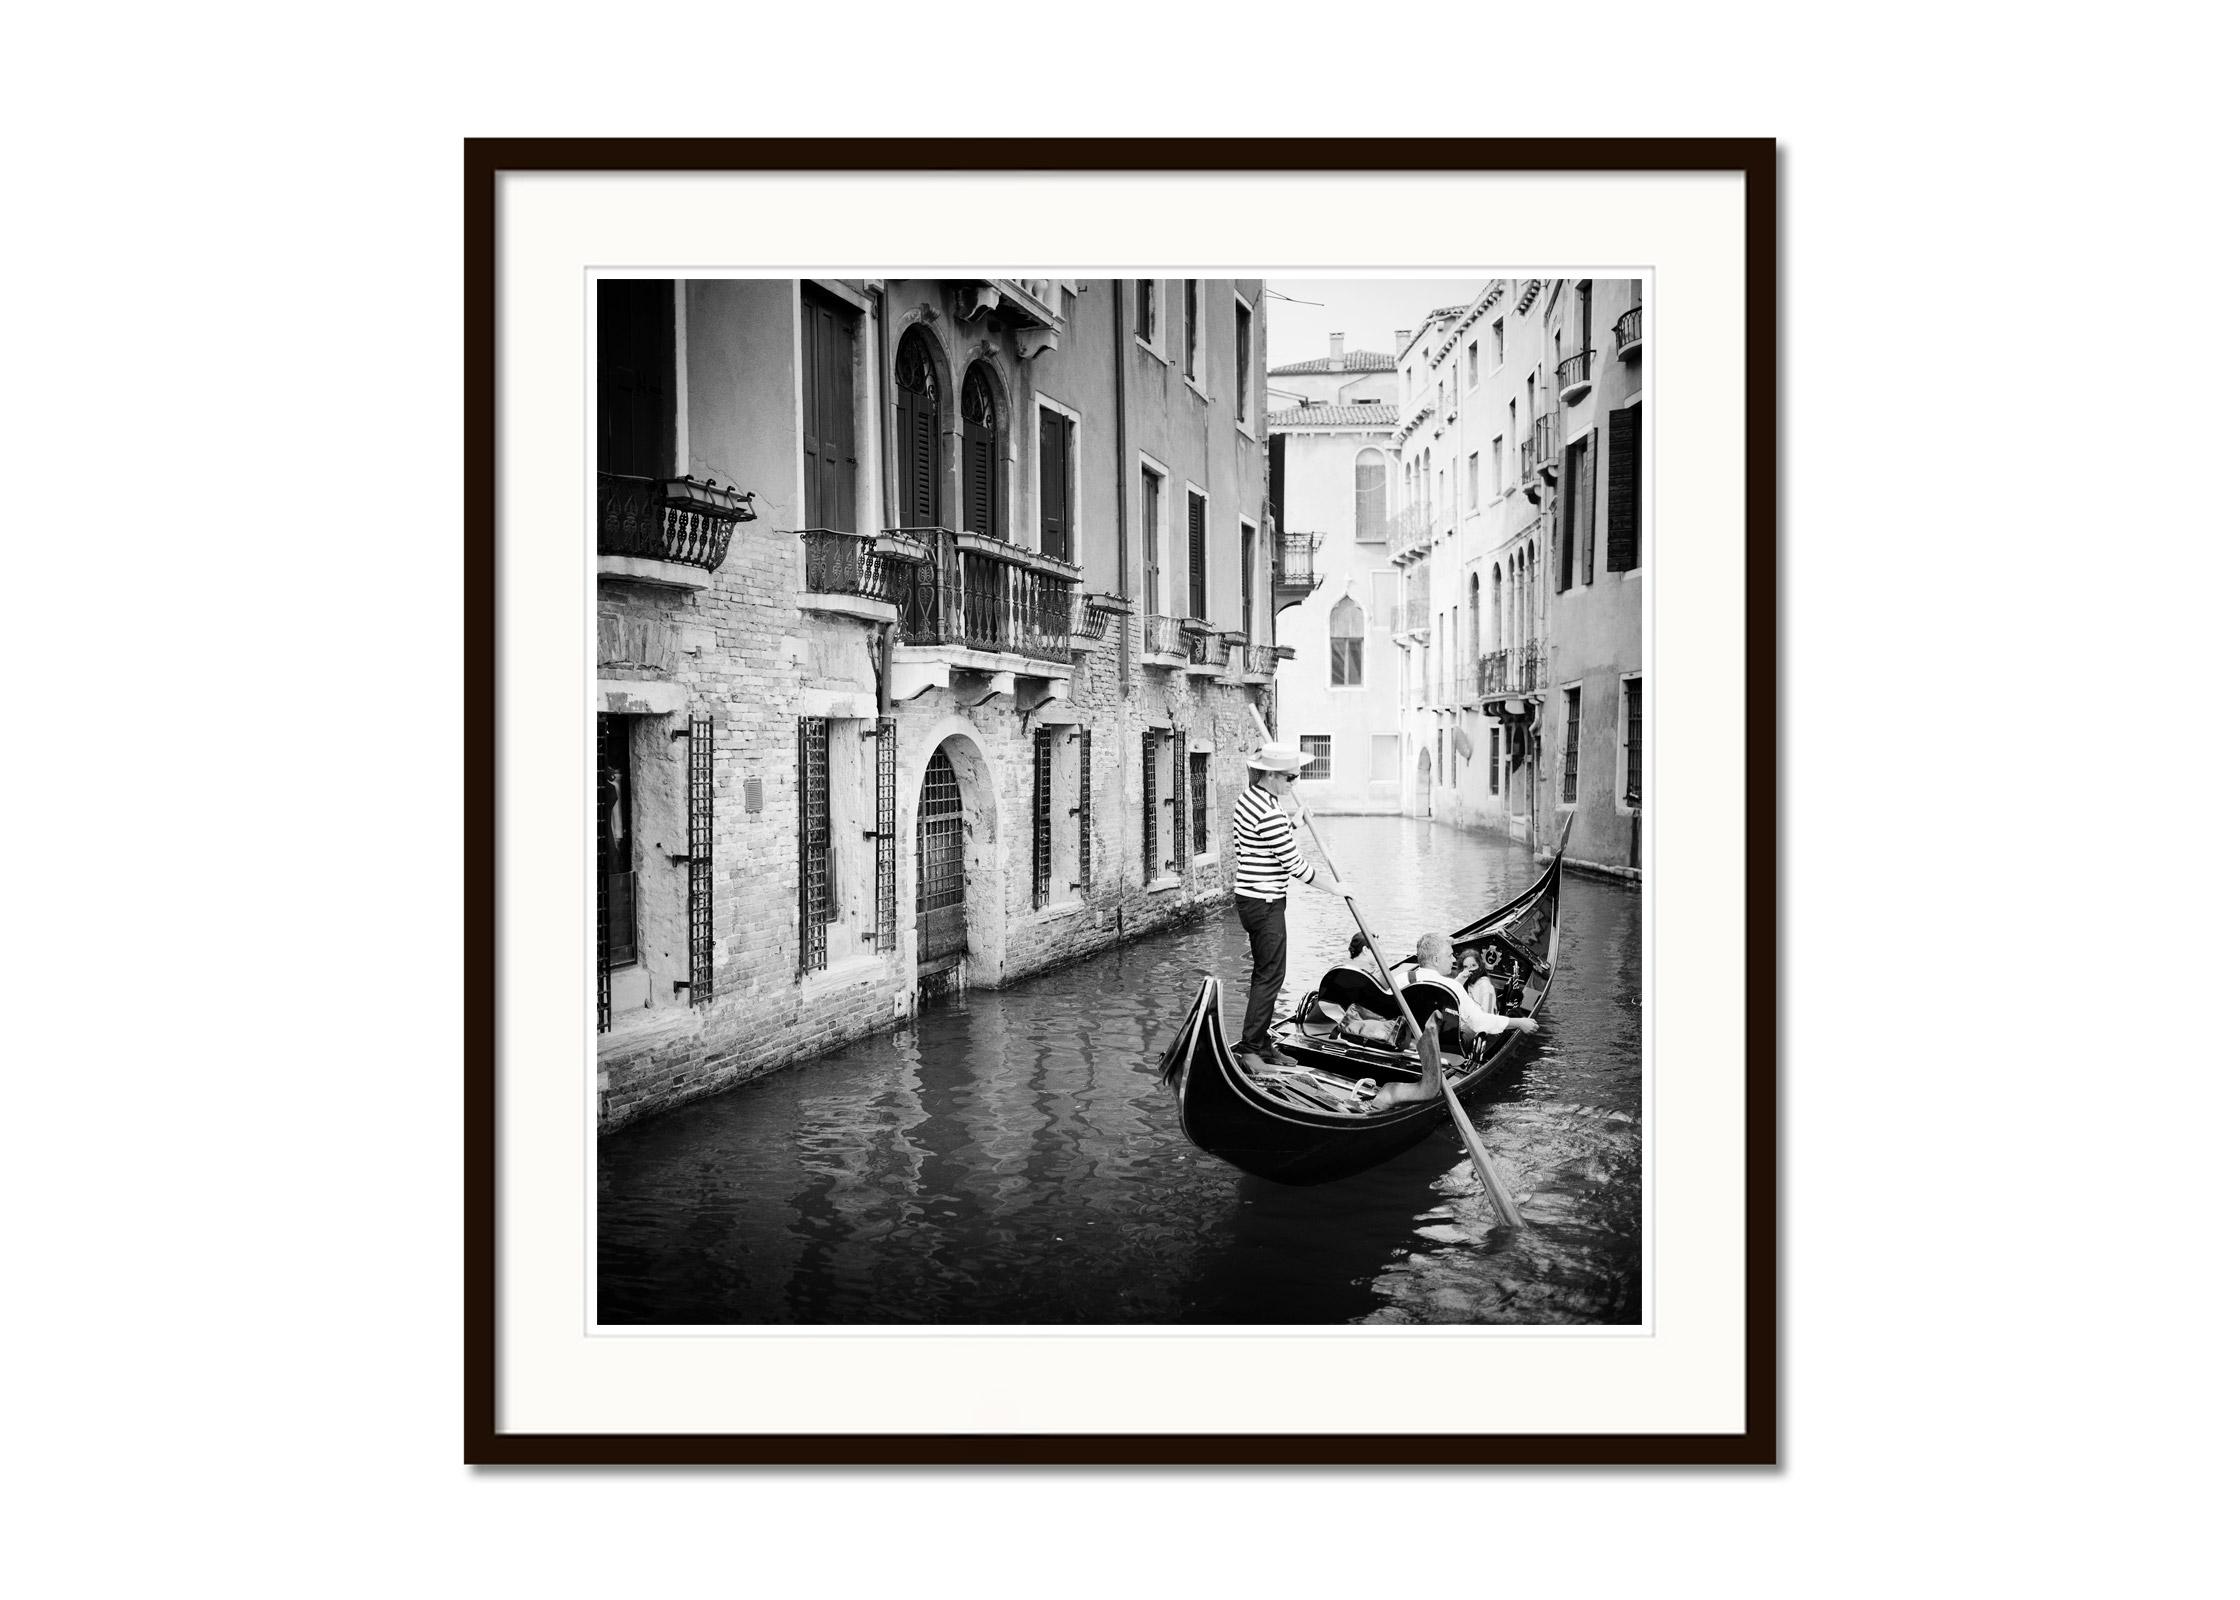 Gondoliere, Gondola, Canal, Venice, black and white art cityscape photography - Gray Landscape Photograph by Gerald Berghammer